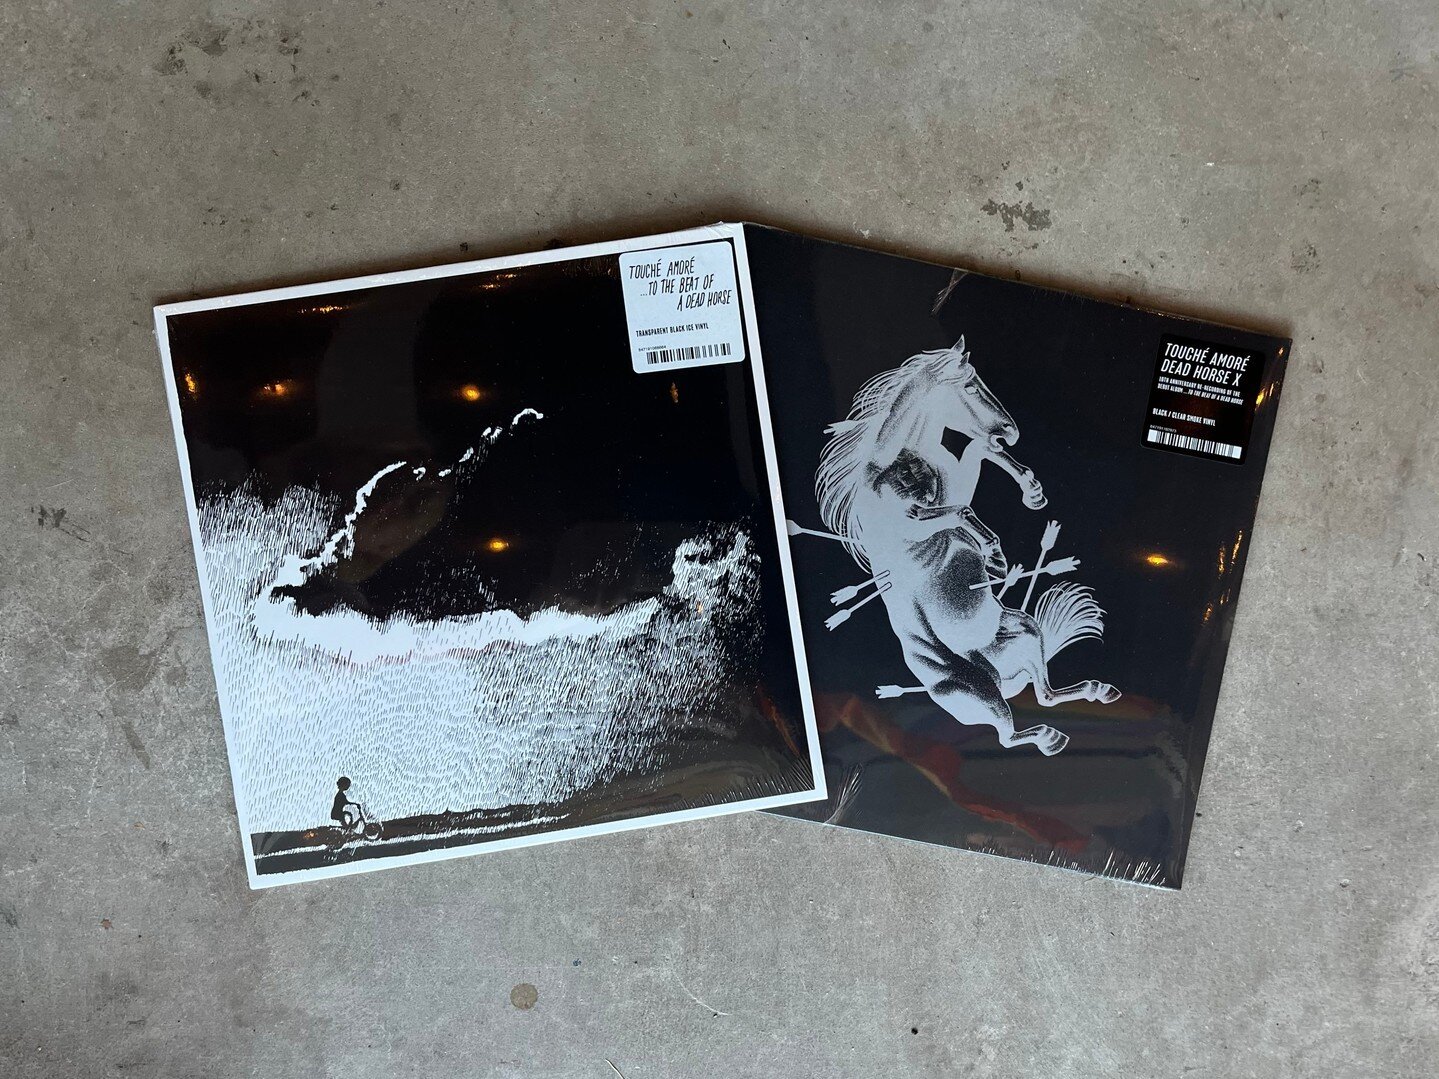 &quot;...To the Beat of a Dead Horse&quot; by Touche Amore is back in stock, along with the 10th-anniversary version!